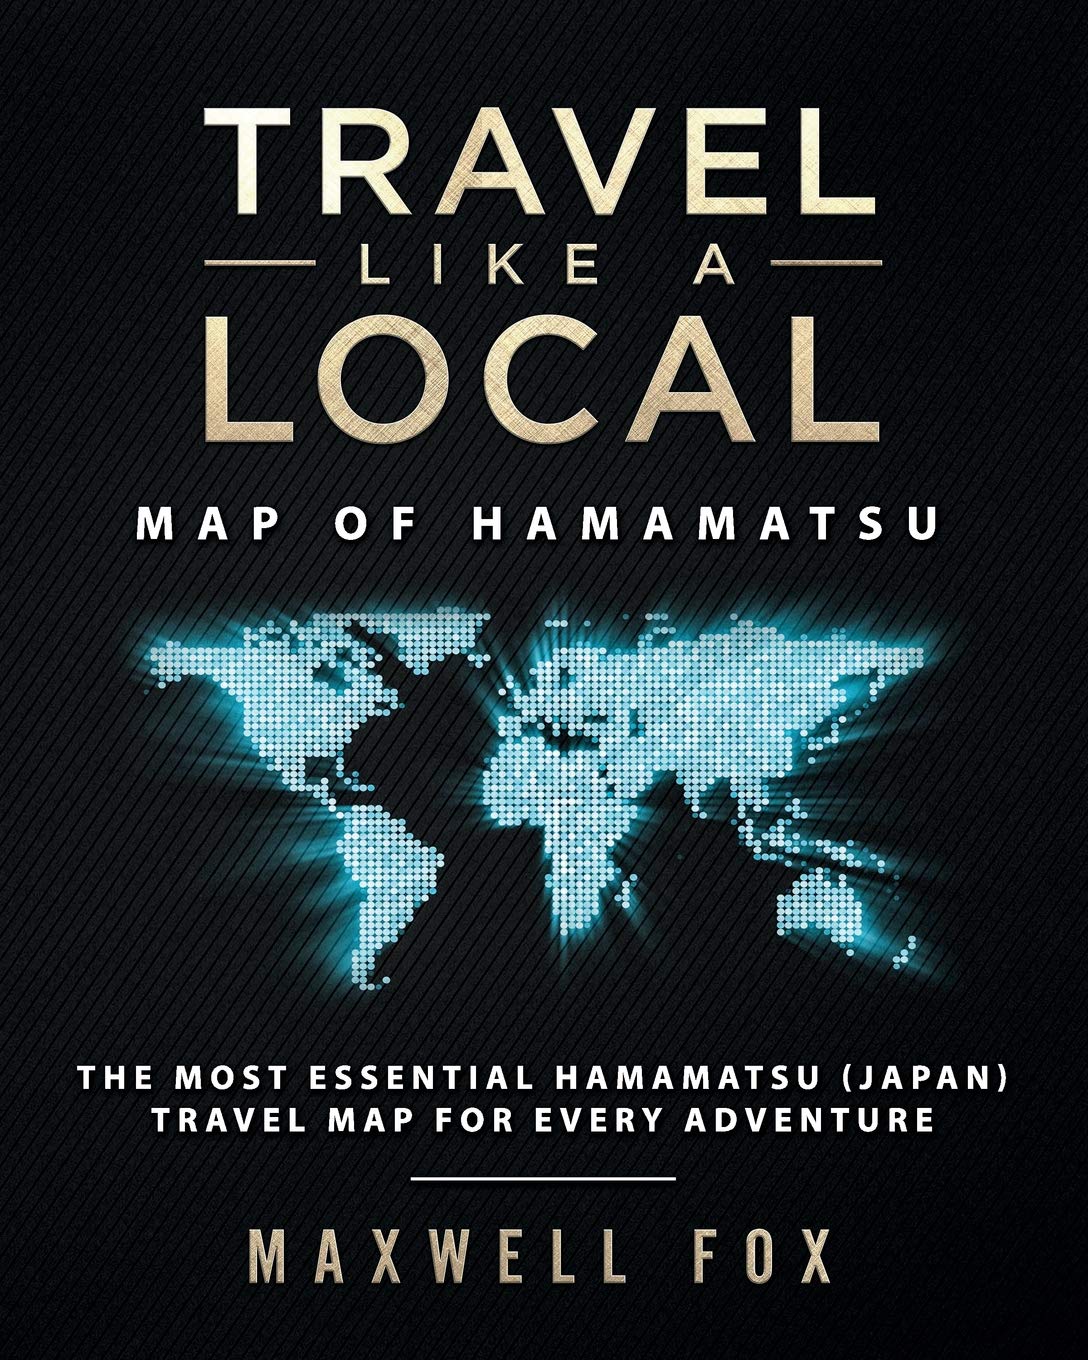 Travel Like a Local - Map of Hamamatsu: The Most Essential Hamamatsu (Japan) Travel Map for Every Adventure